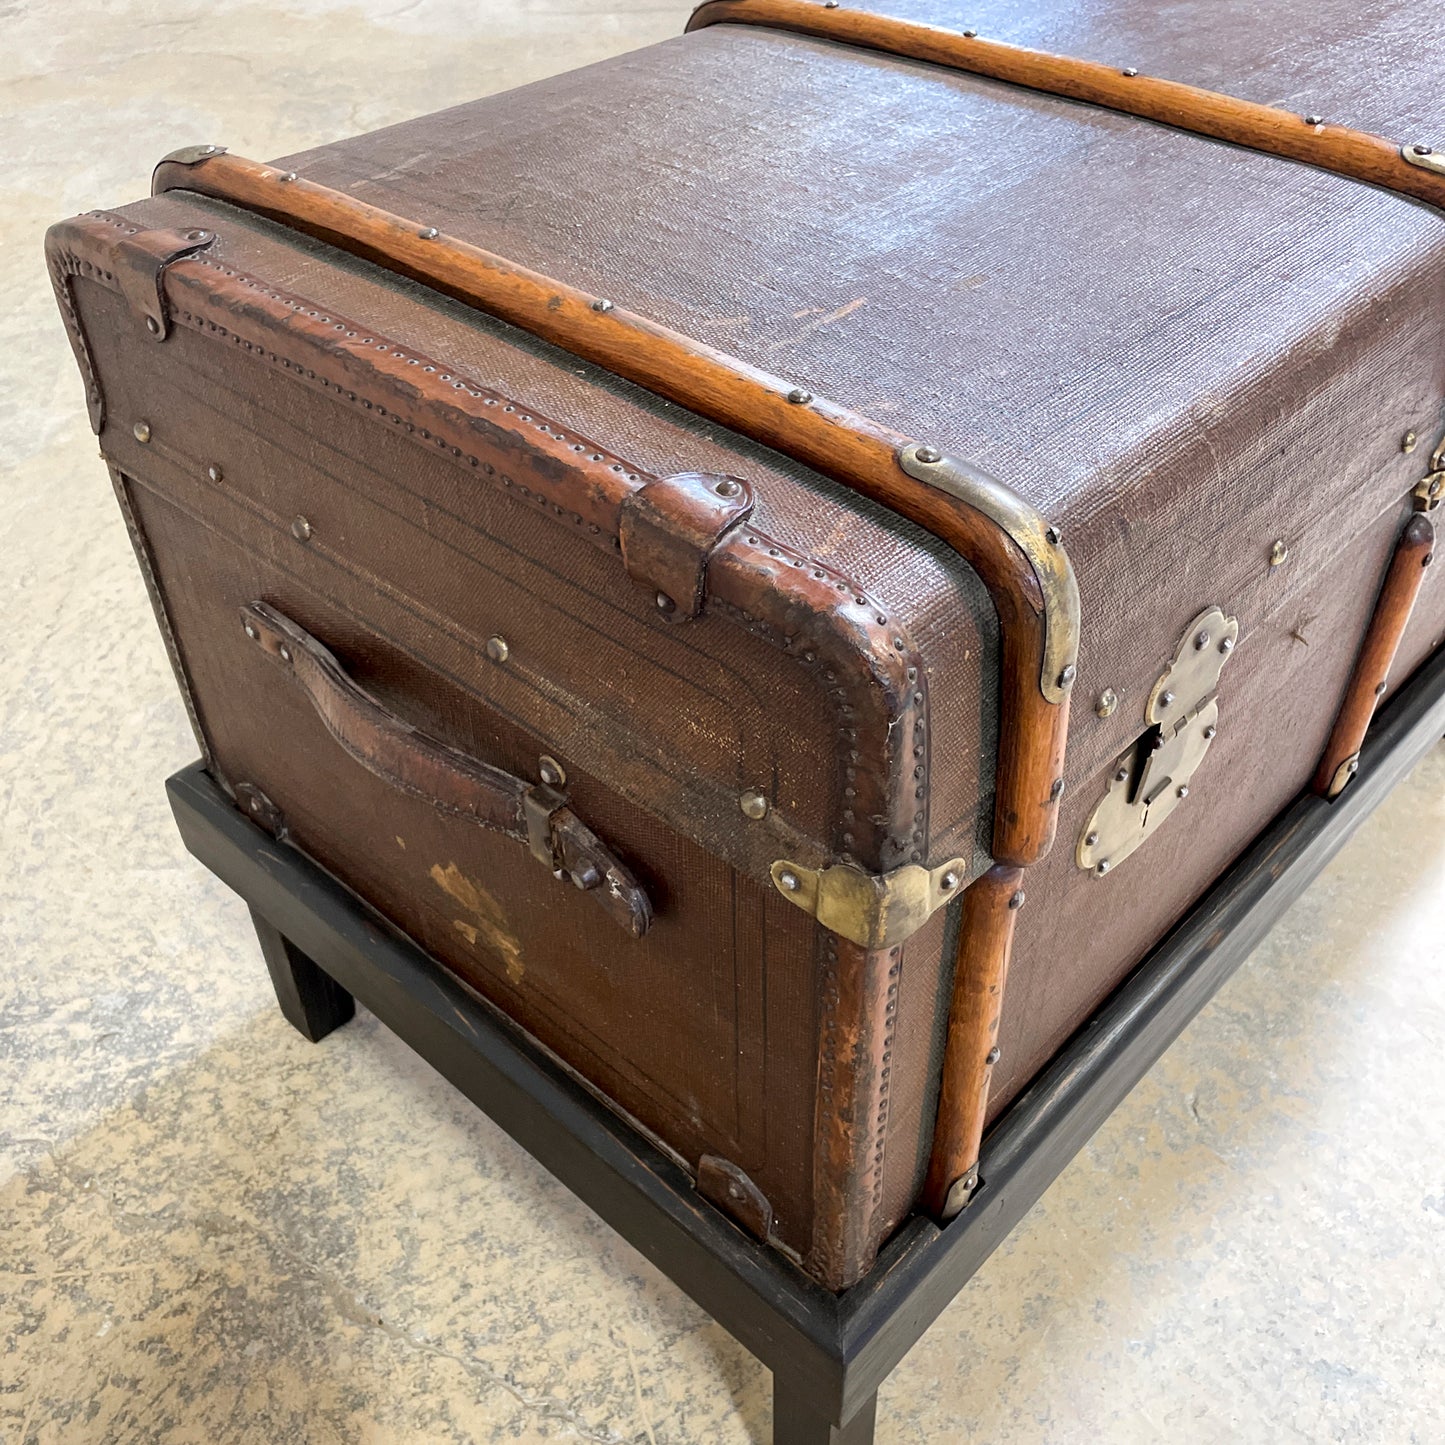 Luggage Trunk on stand